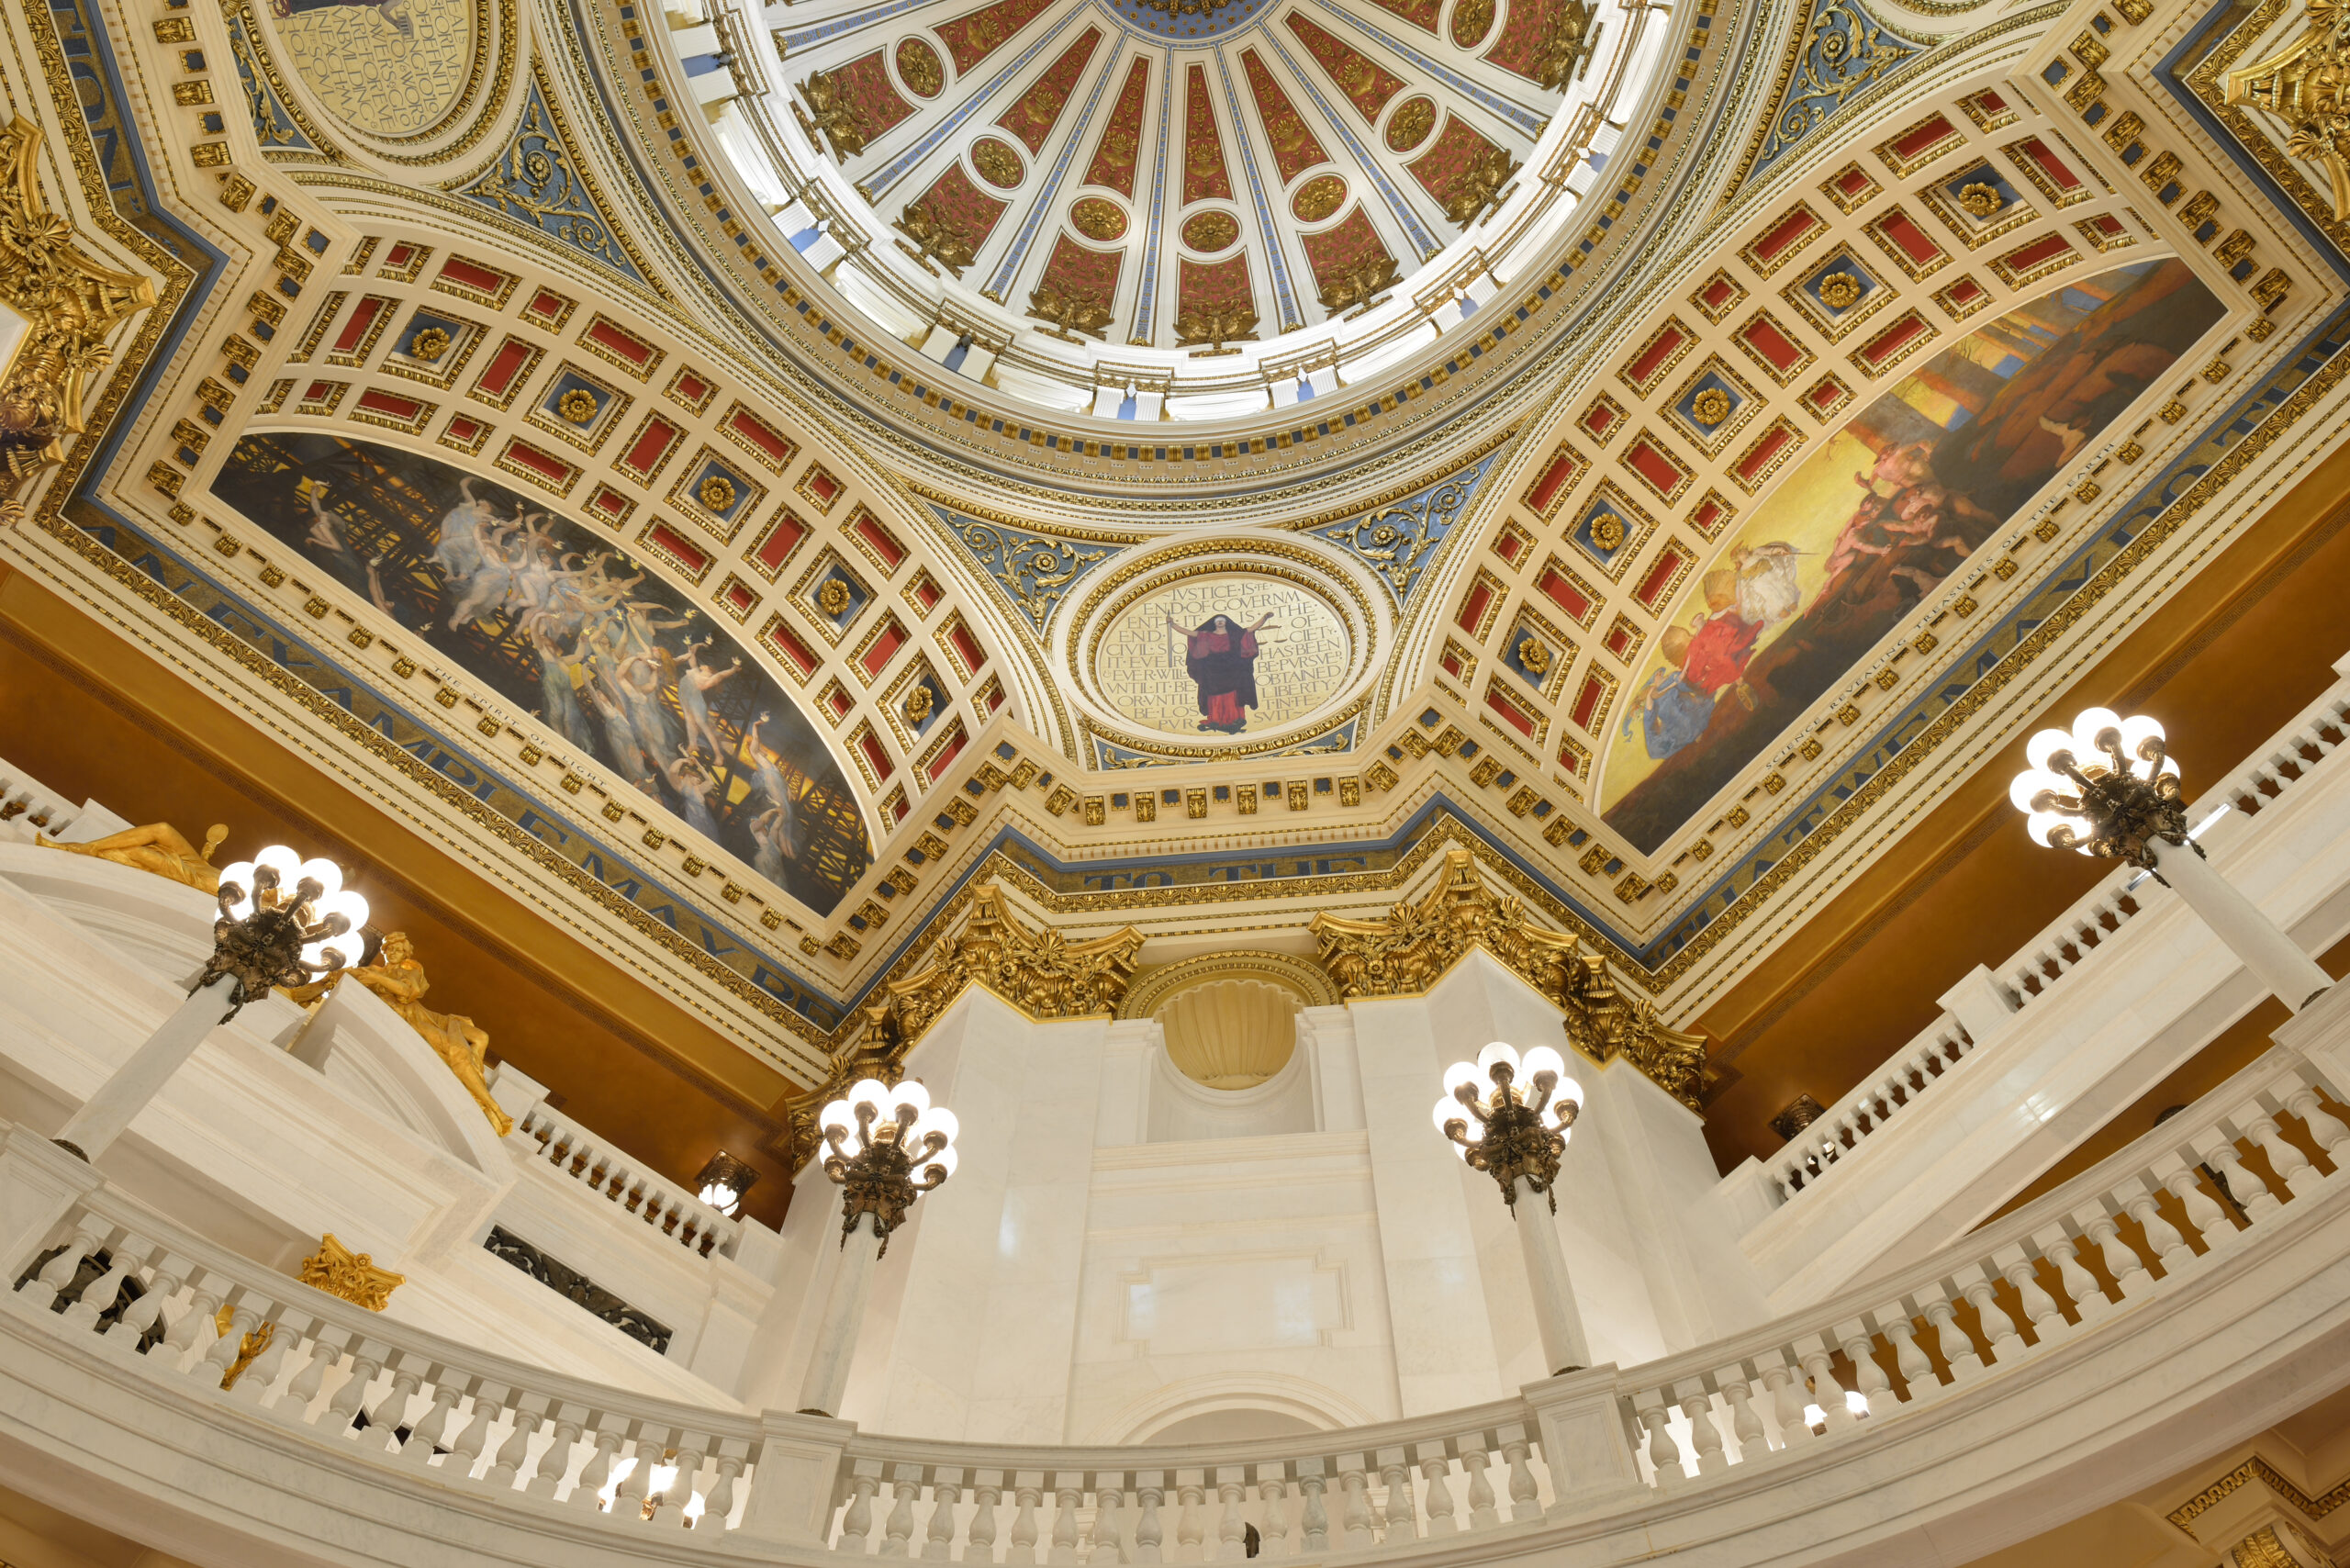 Architectural details of rotunda inside the Pennsylvania Capitol